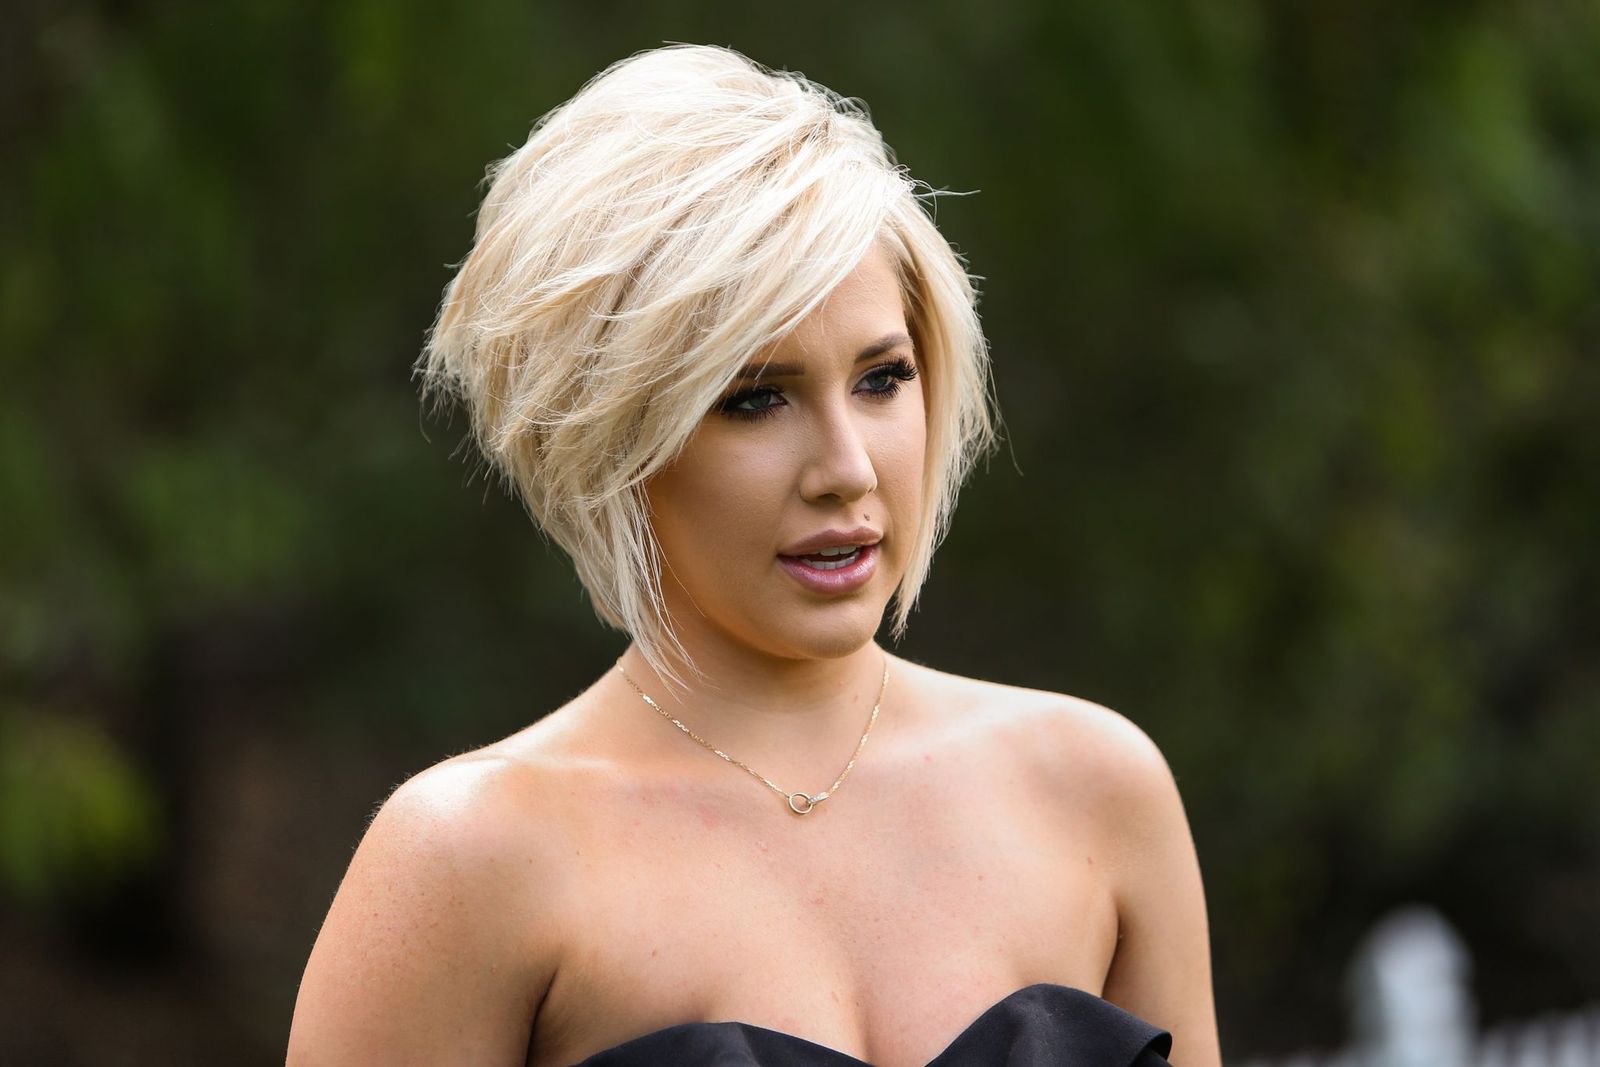 Savannah Chrisley visits Hallmark's "Home & Family" at Universal Studios Hollywood on March 27, 2019, in Universal City, California | Photo: Paul Archuleta/Getty Images